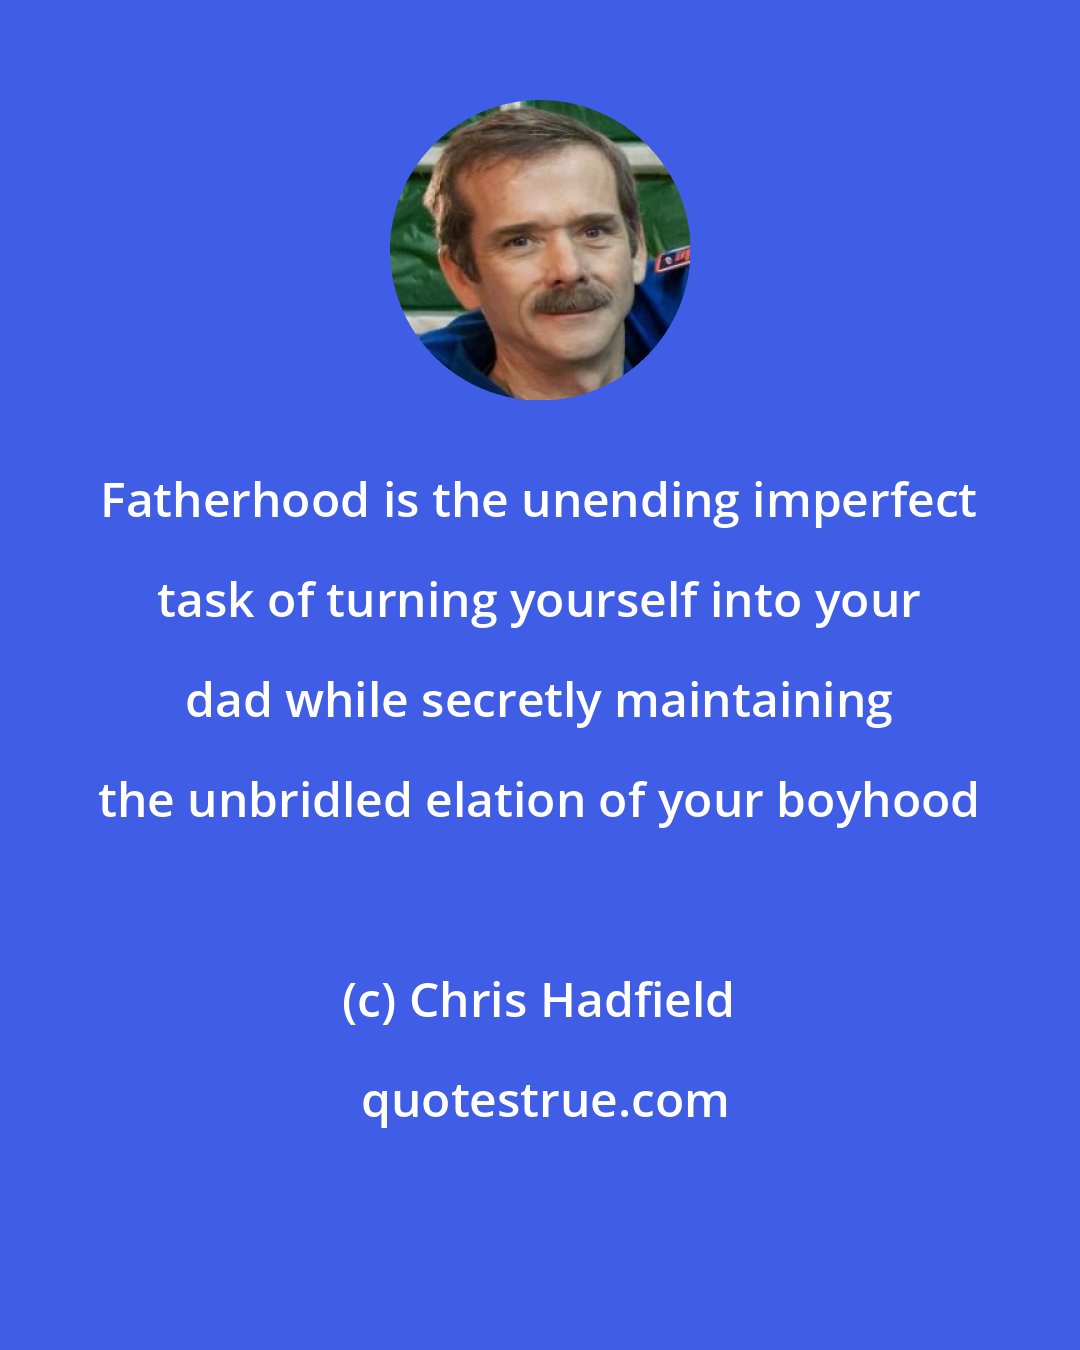 Chris Hadfield: Fatherhood is the unending imperfect task of turning yourself into your dad while secretly maintaining the unbridled elation of your boyhood